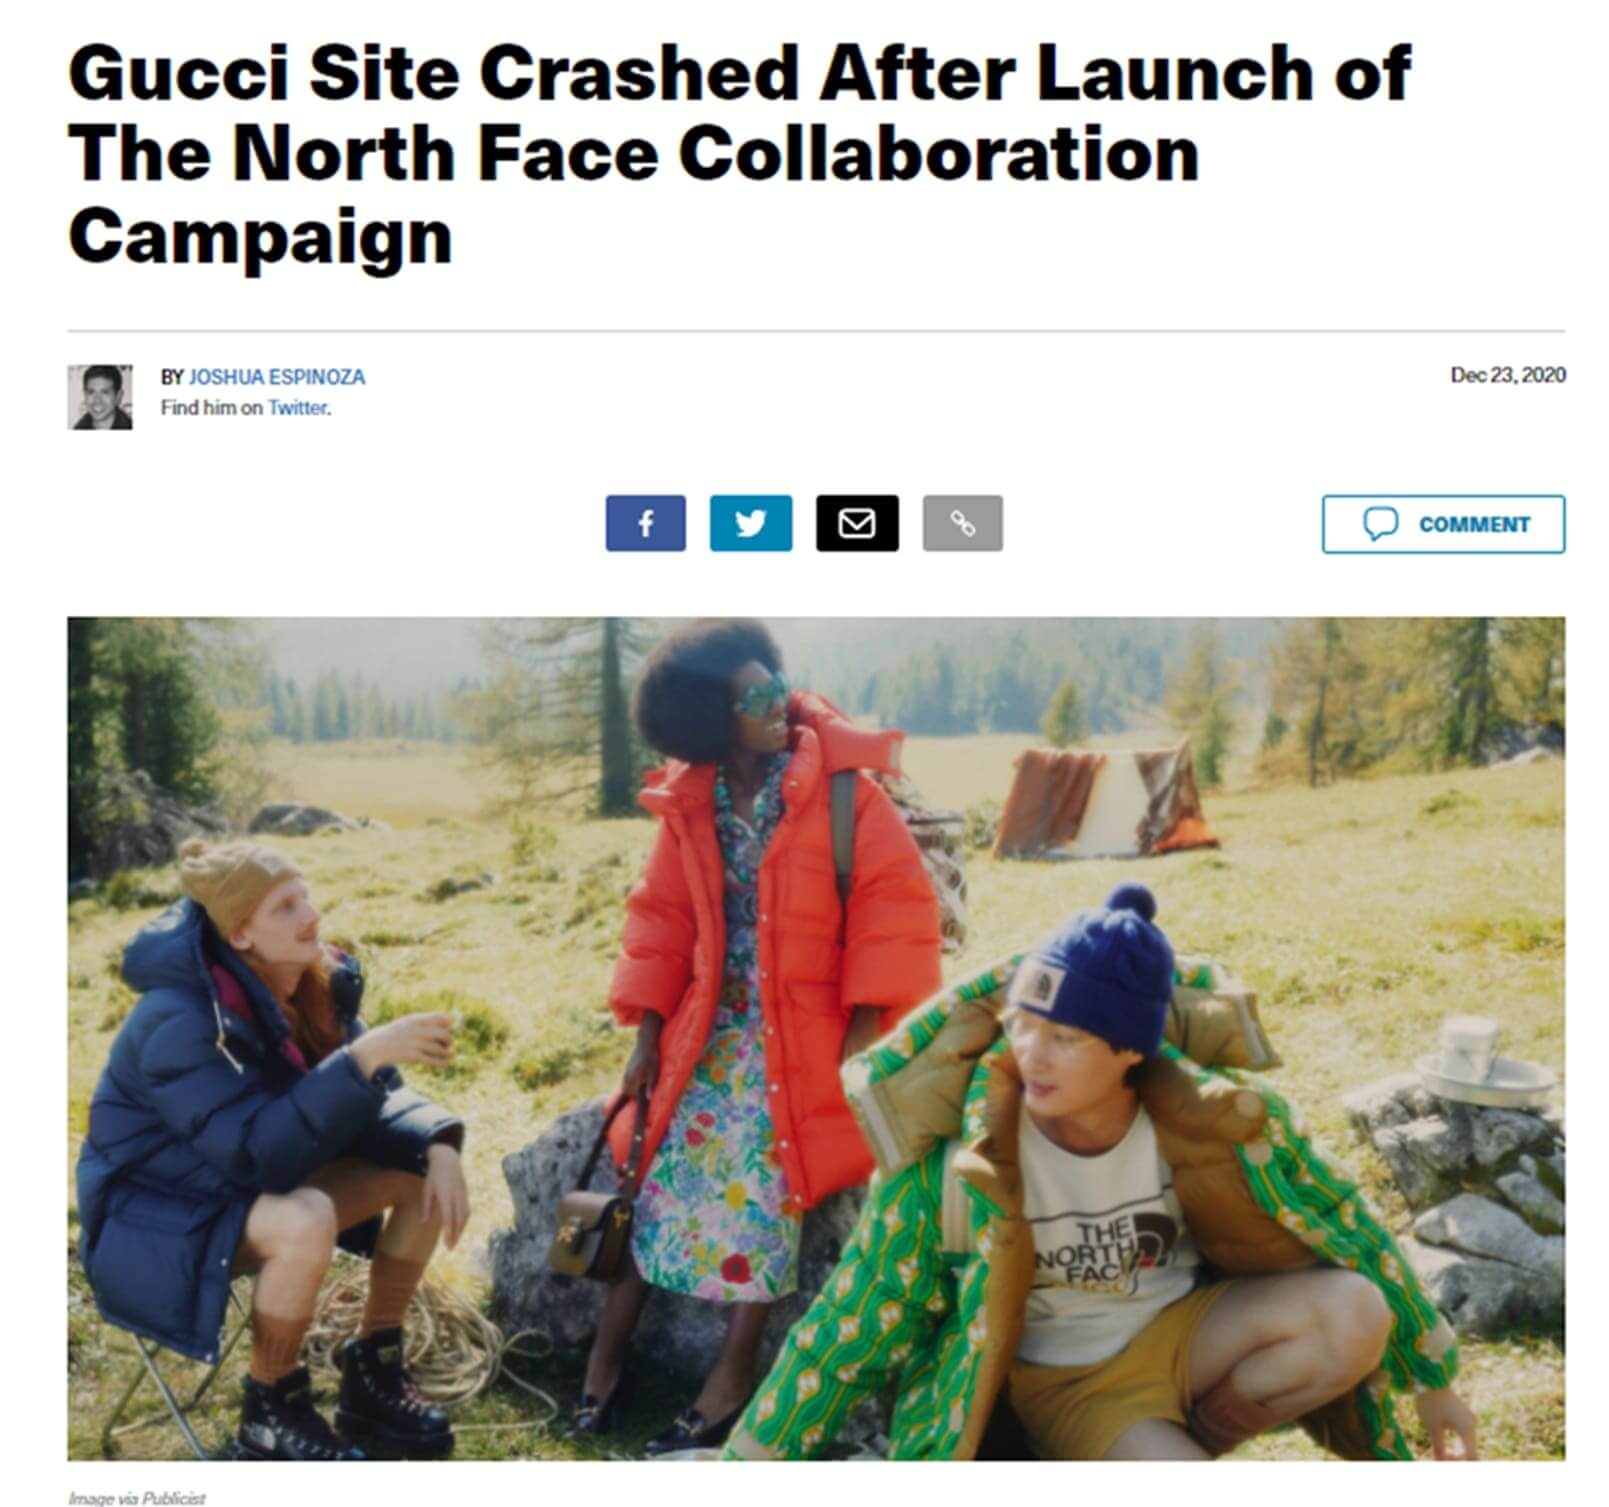 Headline "Gucci site crashed after launch of The North Face collaboration campaign"